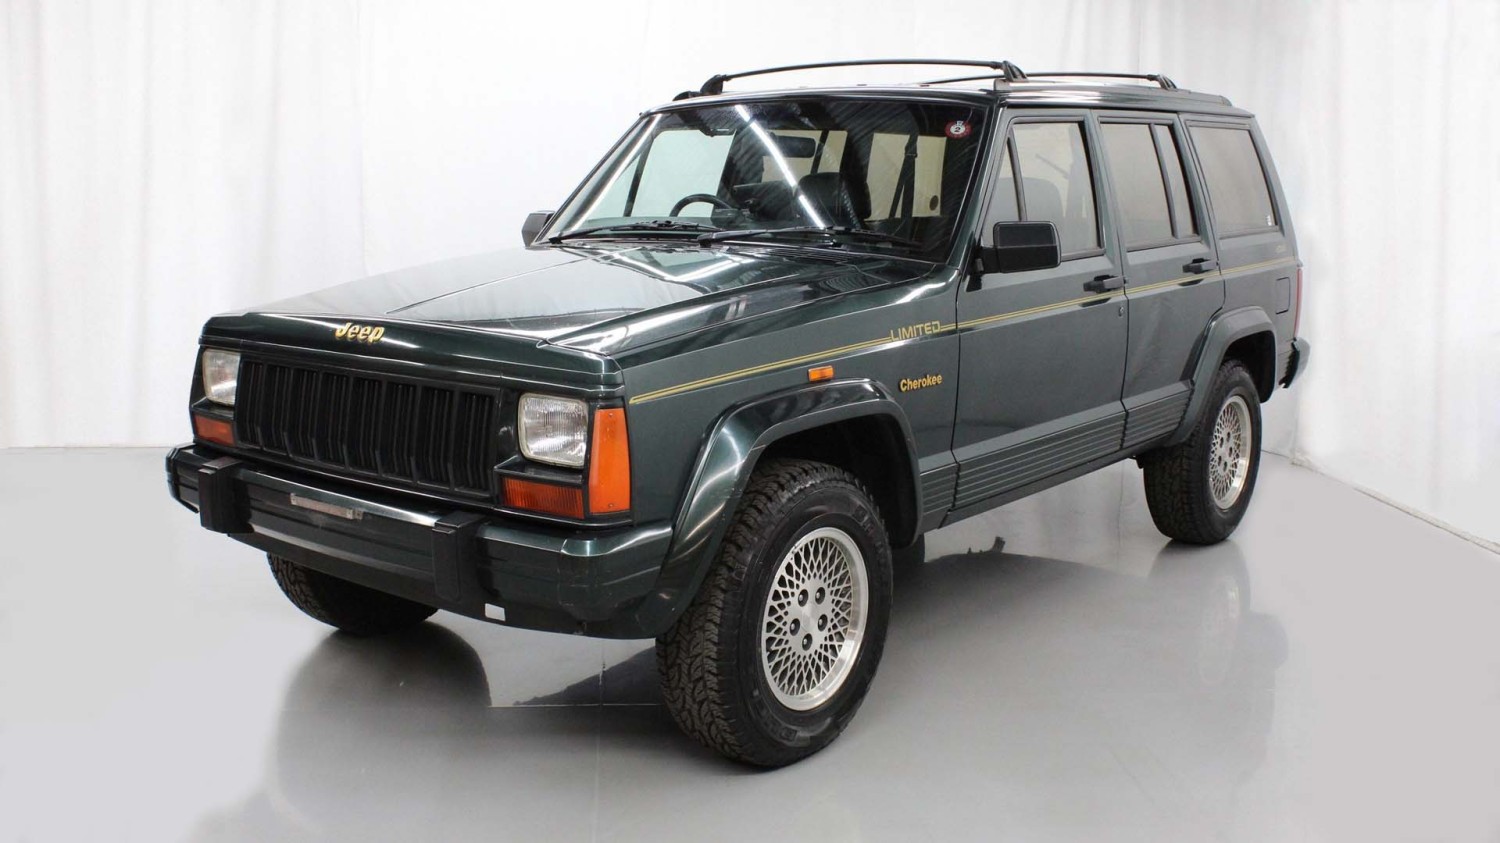 1994 Jeep CHEROKEE LIMITED CLASSIC (4x4)